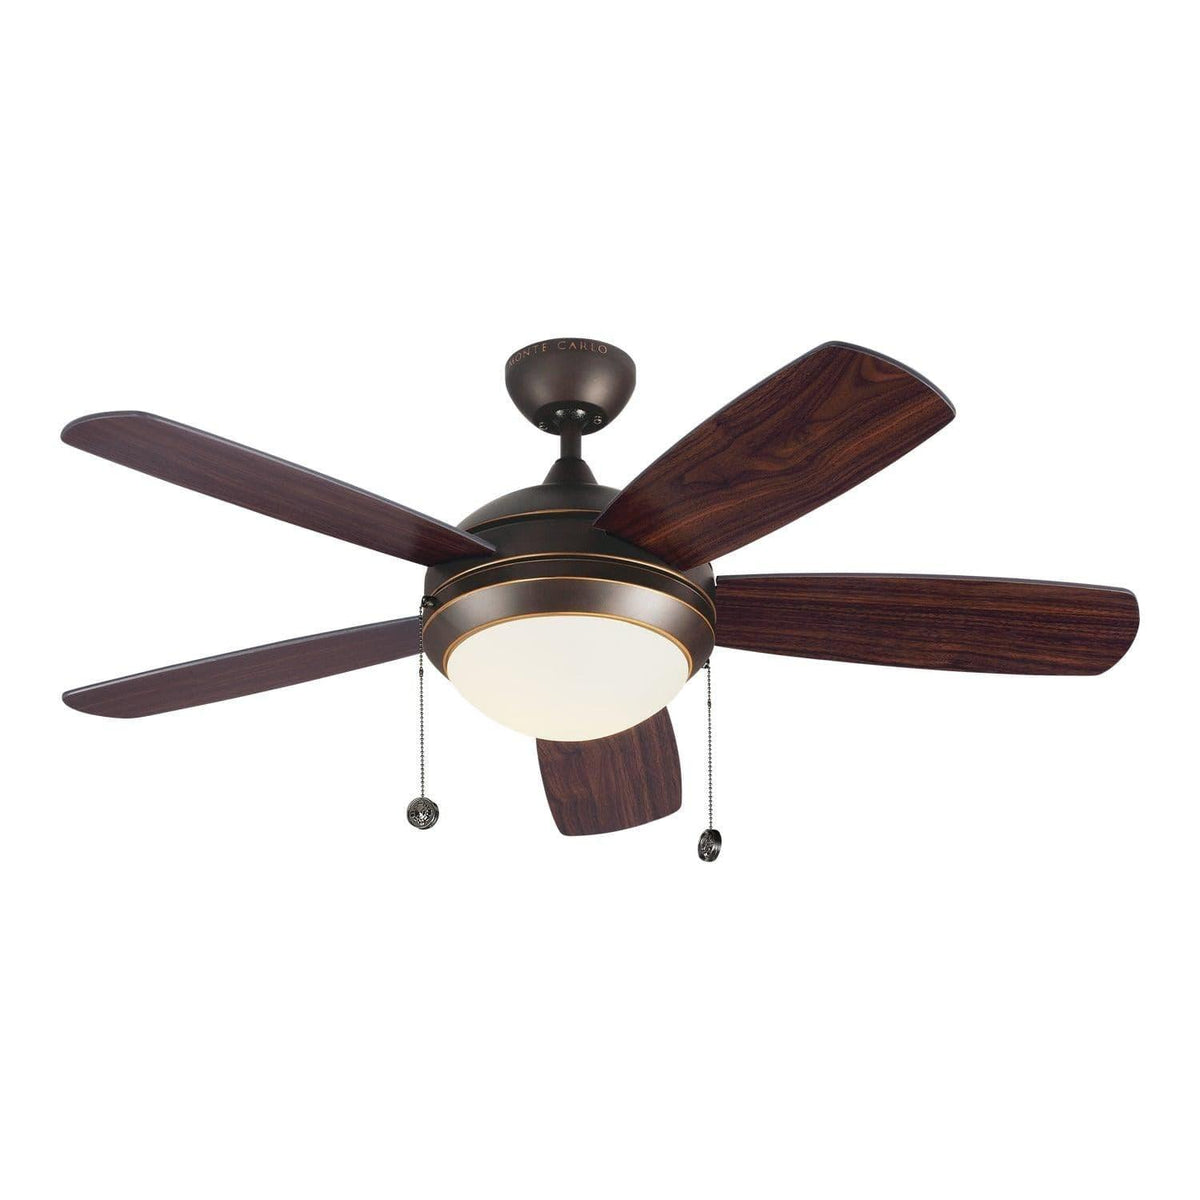 Visual Comfort Fan Collection - Discus Classic II 44" Ceiling Fan - 5DIC44RBD-V1 | Montreal Lighting & Hardware